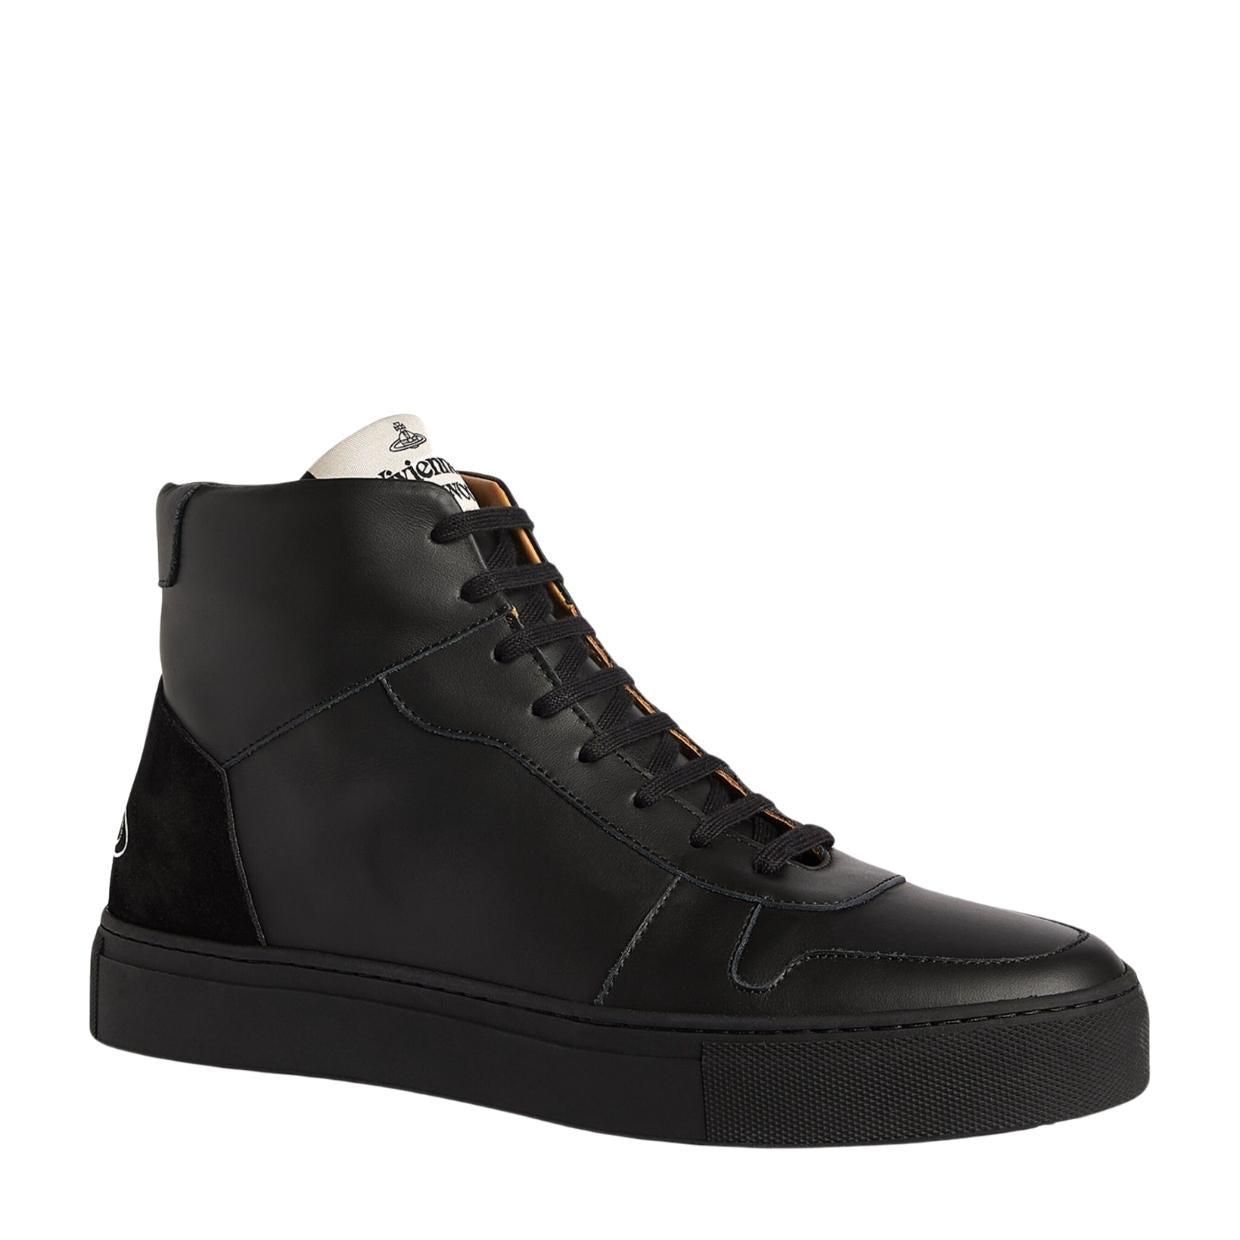 Vivienne Westwood Classic Black High Top Trainers